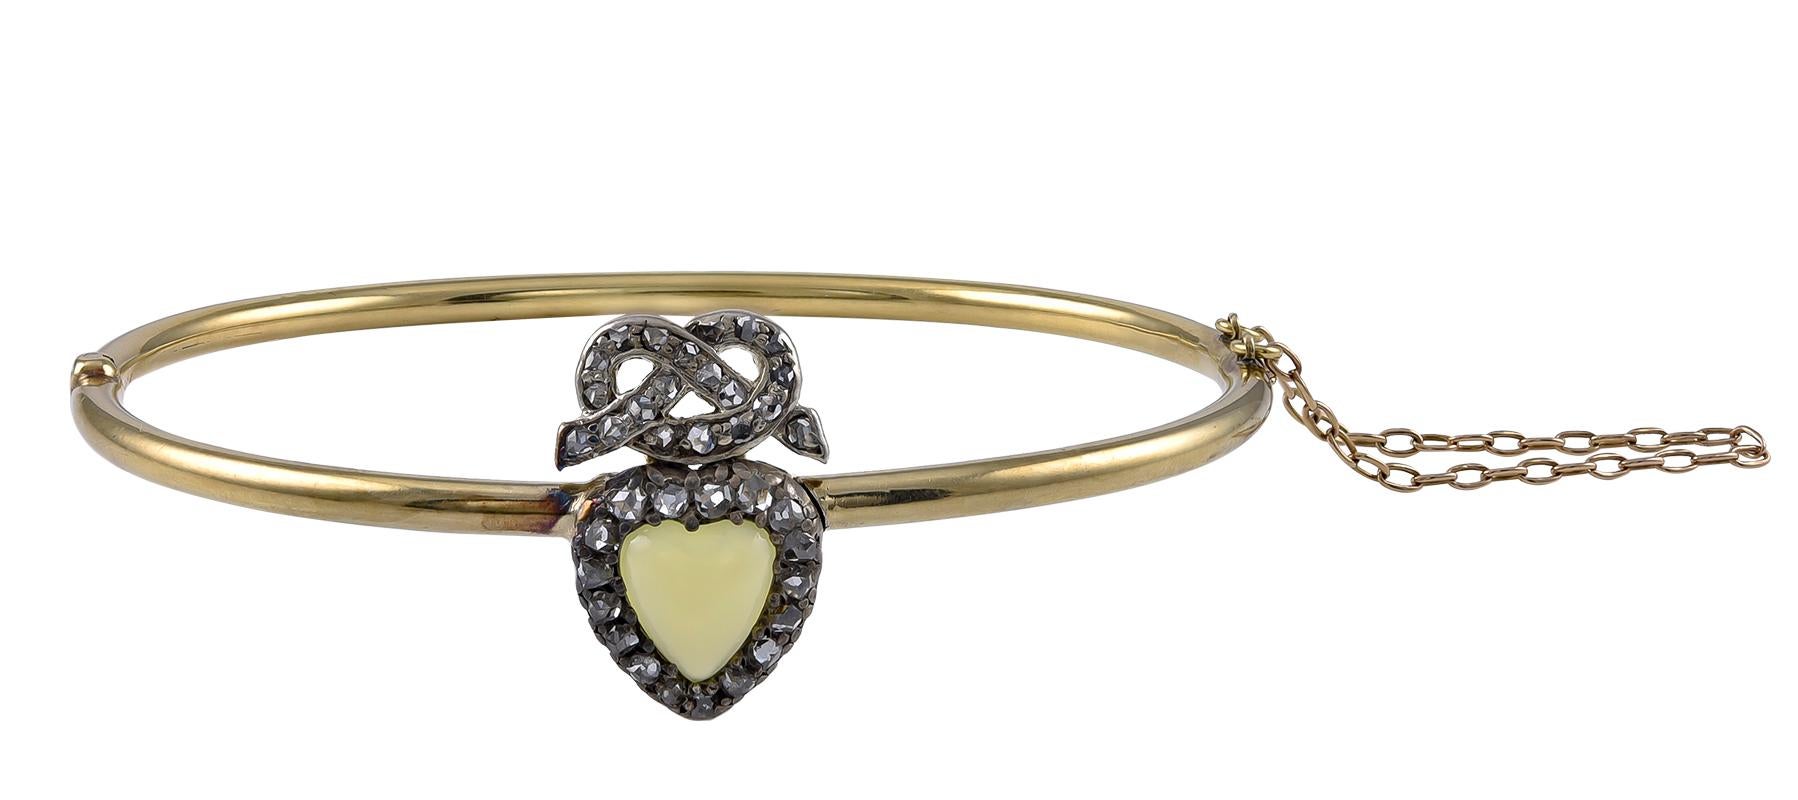 The Chrysoprase Heart of a luminous vaseline green colour, with a Rose Diamond set Silver on Gold 
surround and with a Rose Diamond Lovers Knot above.The slender tubular bangle, testing for 15k Gold, with a good clasp and safety chain and all in